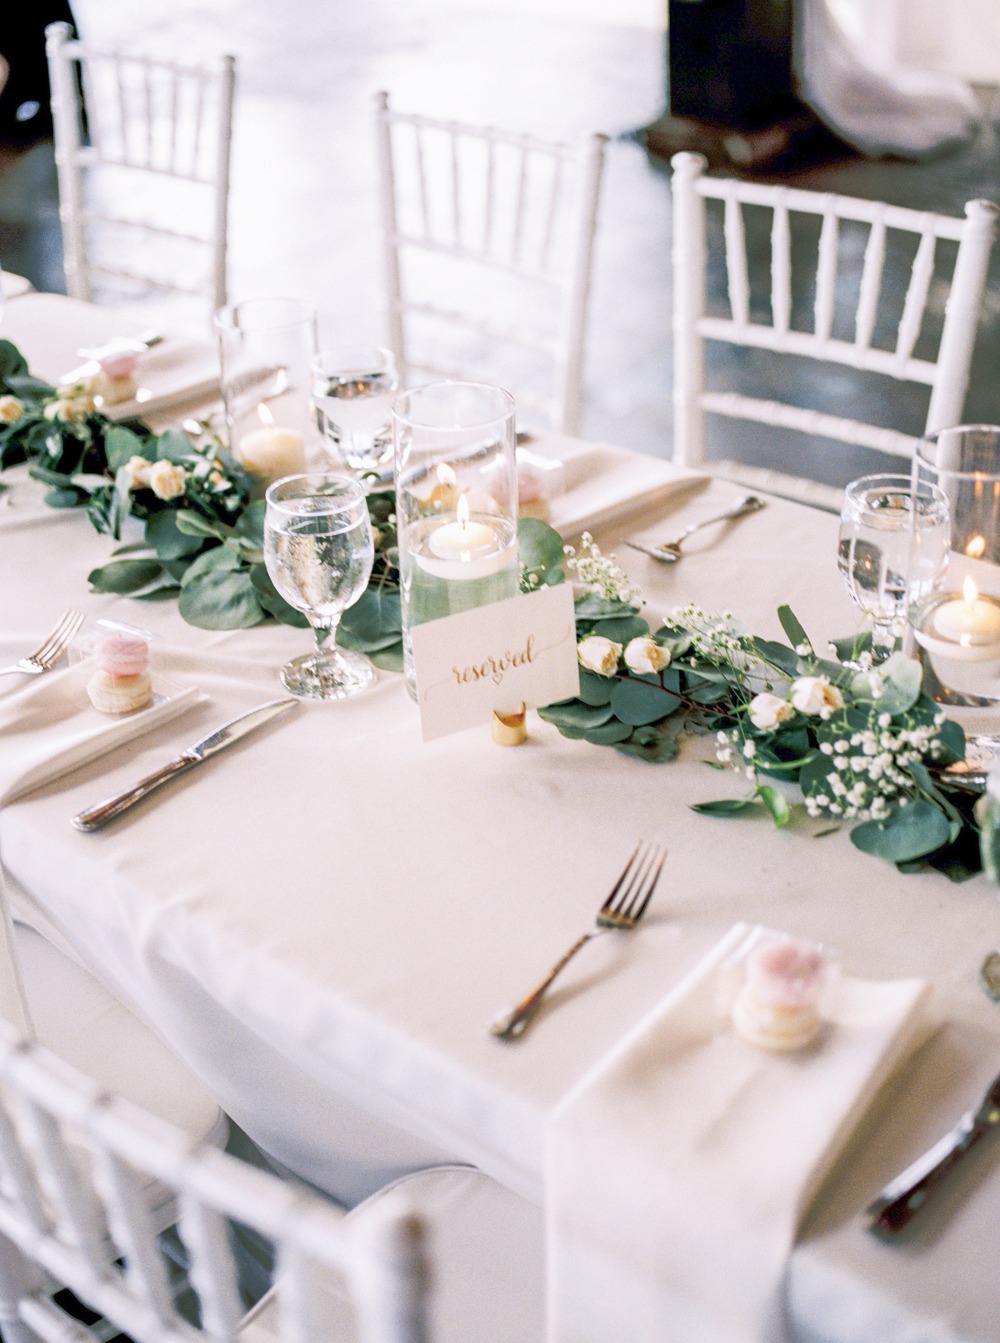 Chic and simple table decor